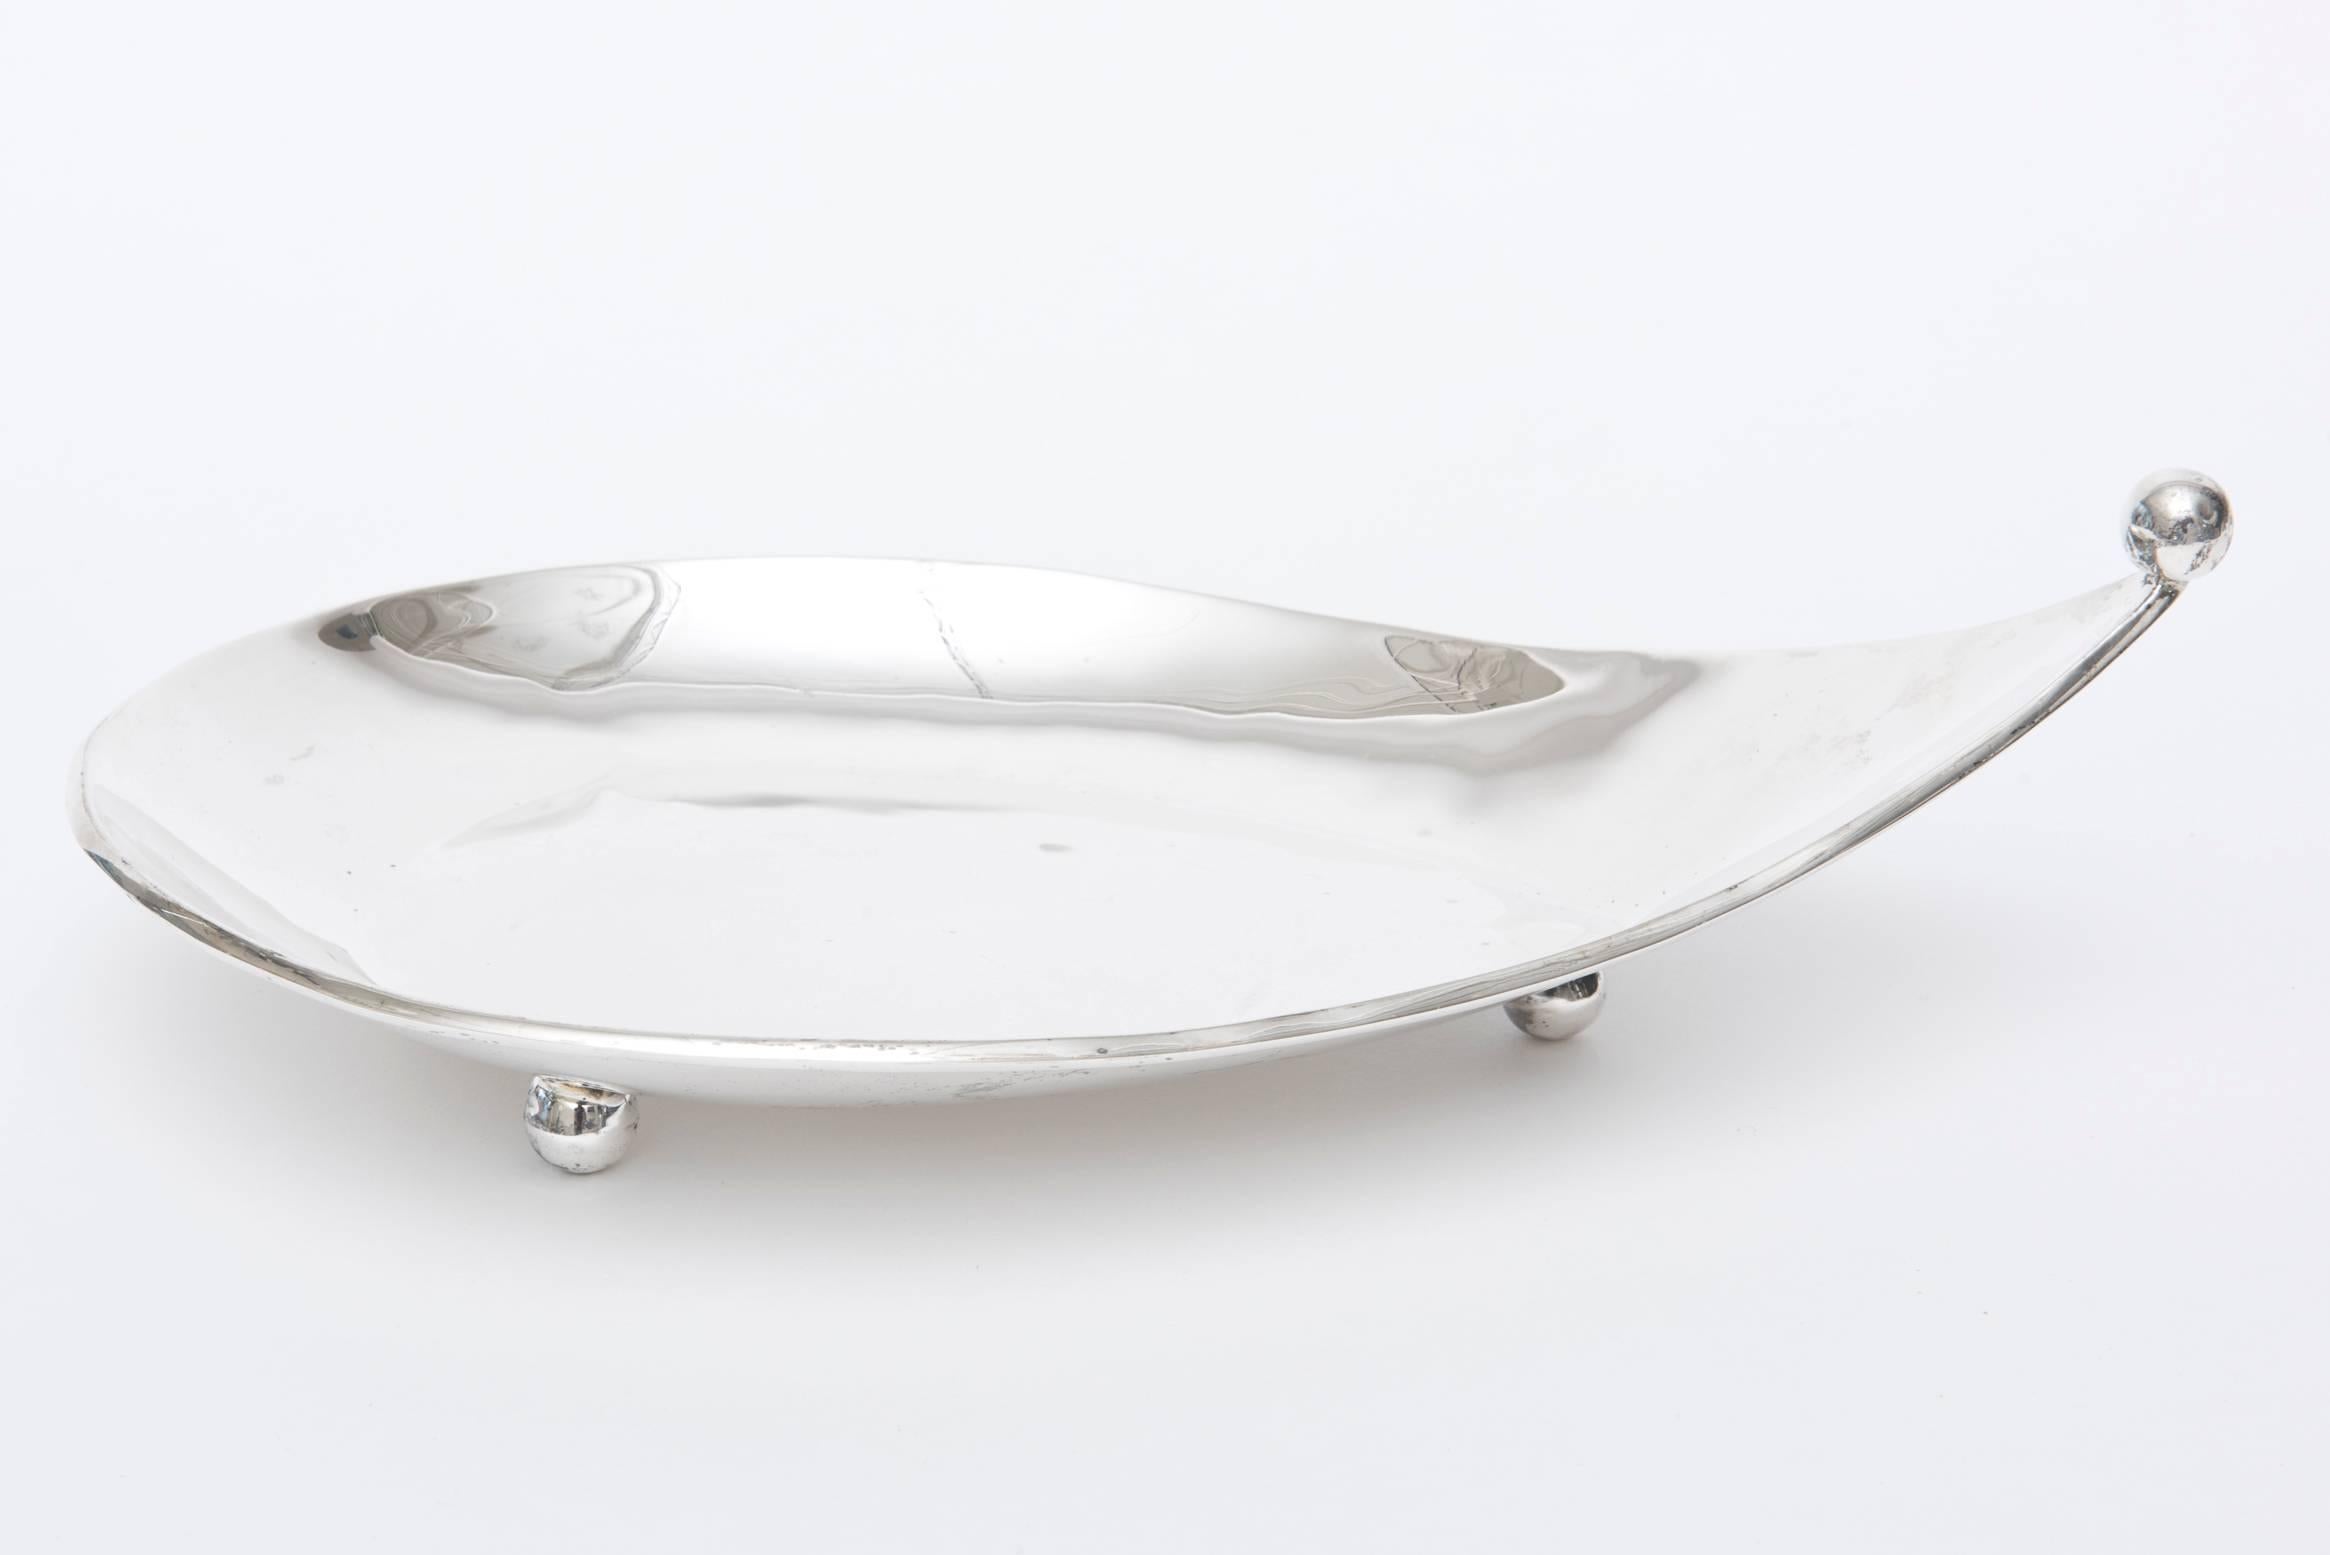 This beautiful hallmarked mid century modern sterling silver bowl and or tray has a beautiful sculptural shape with three round ball feet. There is a round ball at the tip as it dips upward. It is signed Sterling 925 Hecho en Mexico, so it is early